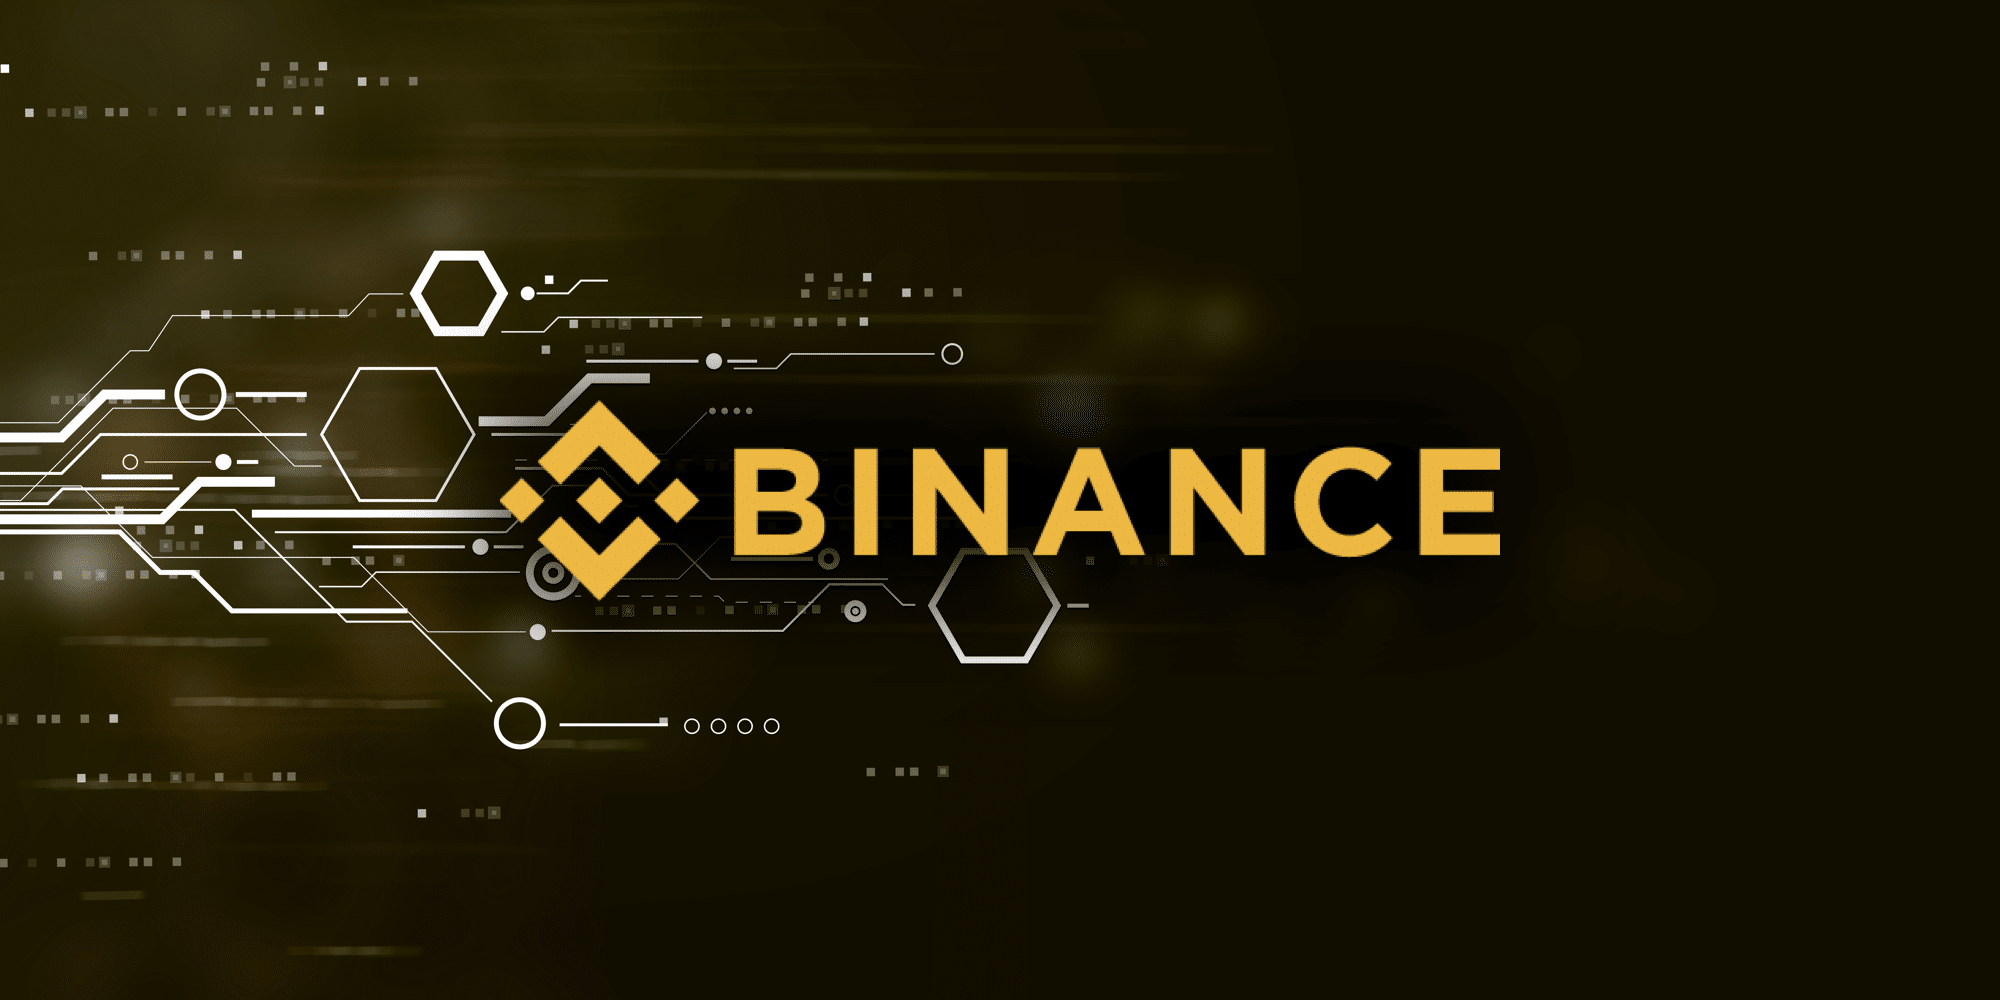 Binance to offer Euro trading pairs this year, announces CEO